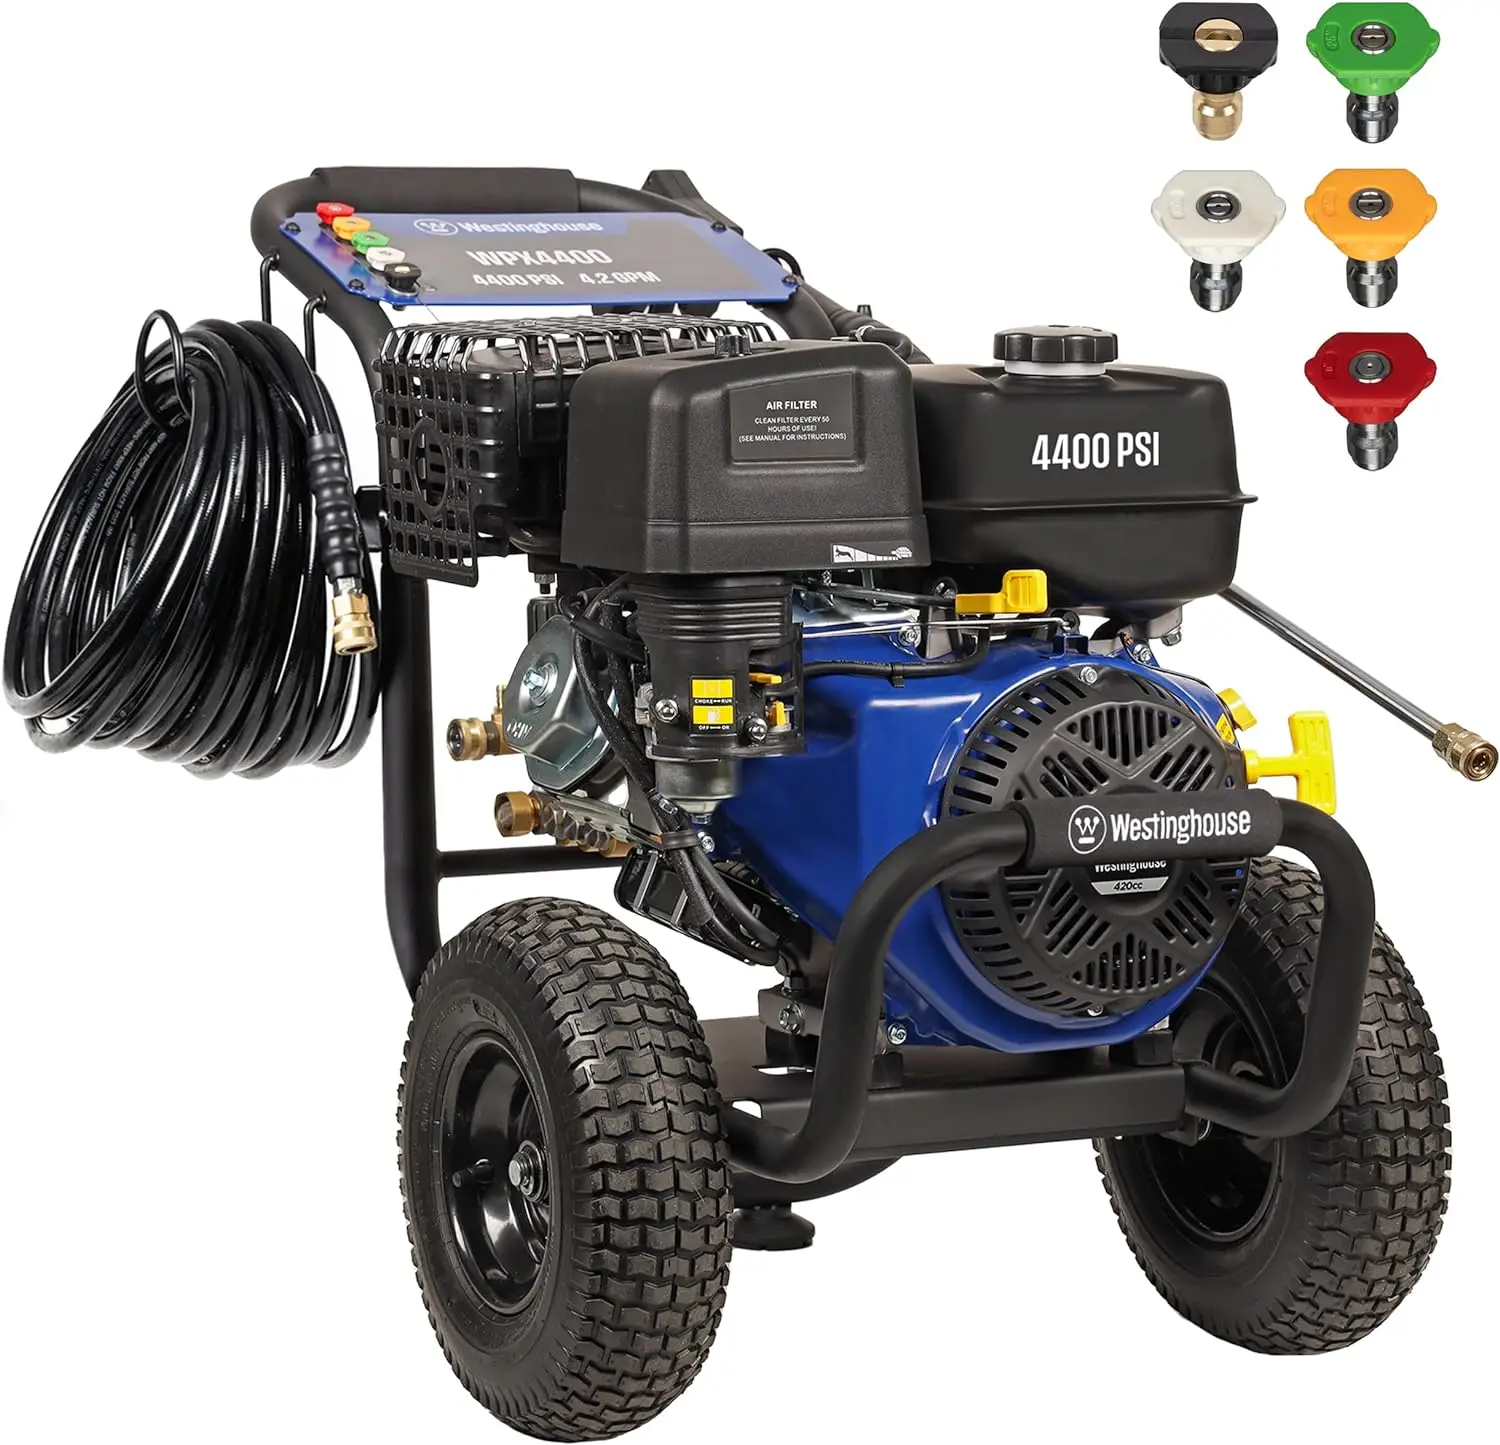 

Westinghouse WPX4400 Gas Pressure Washer, 4400 PSI and 4.2 Max GPM, Spray Gun and Wand, 5 Nozzle Set, for Cars/Fences/Driveways